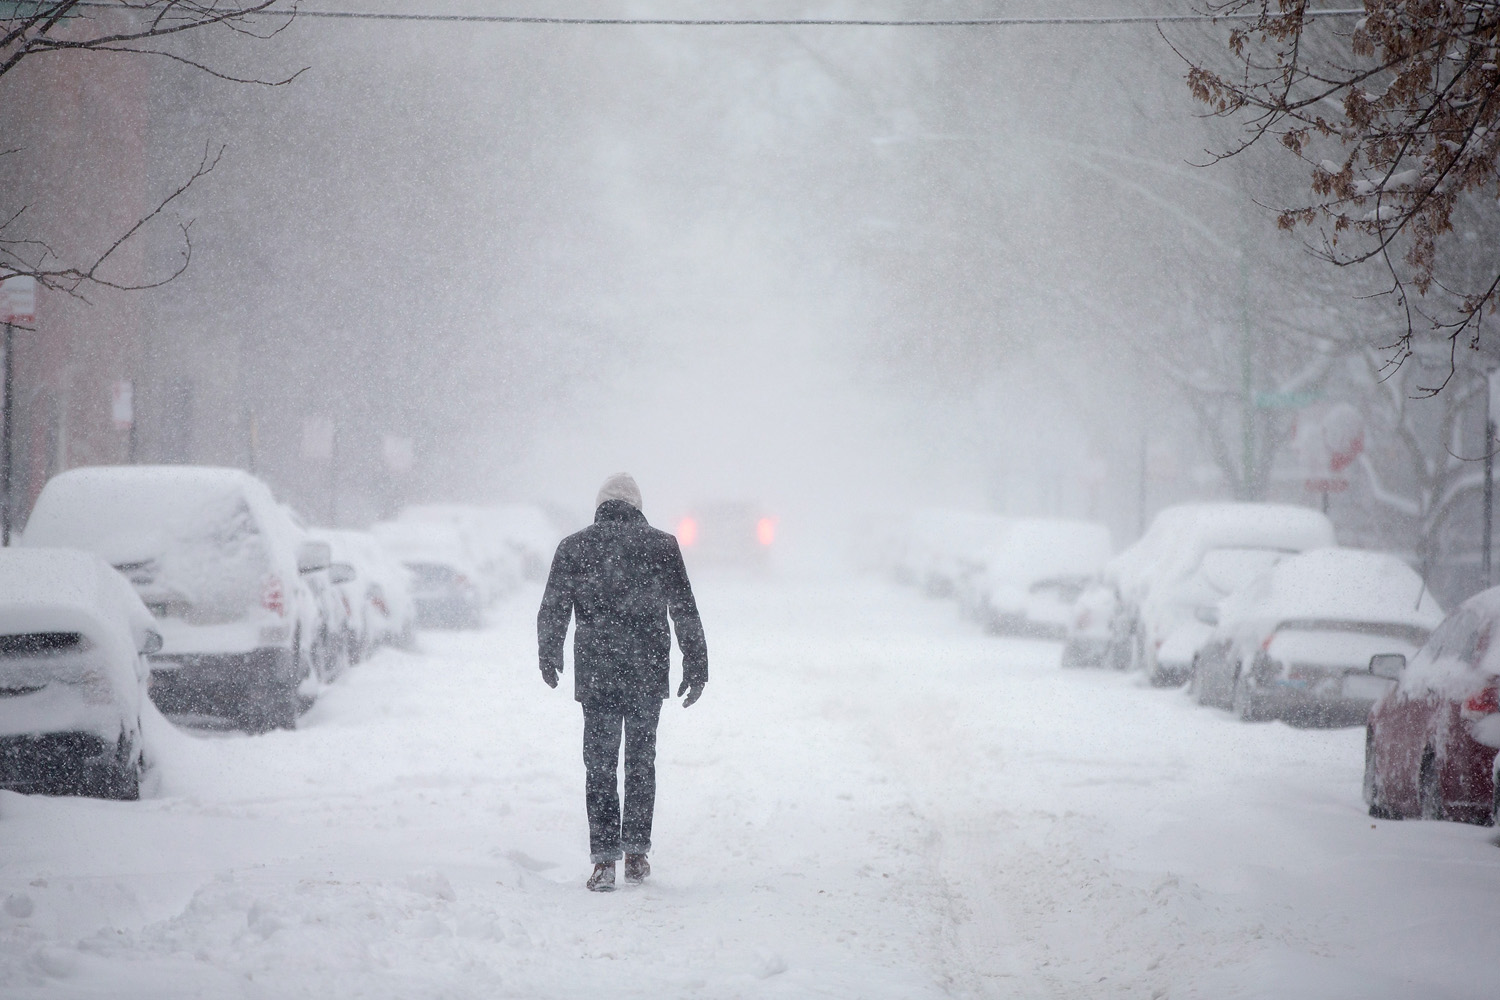 A man walks down a snow-covered street on Feb. 1, 2015 in Chicago, Illinois. (Scott Olson — Getty Images)